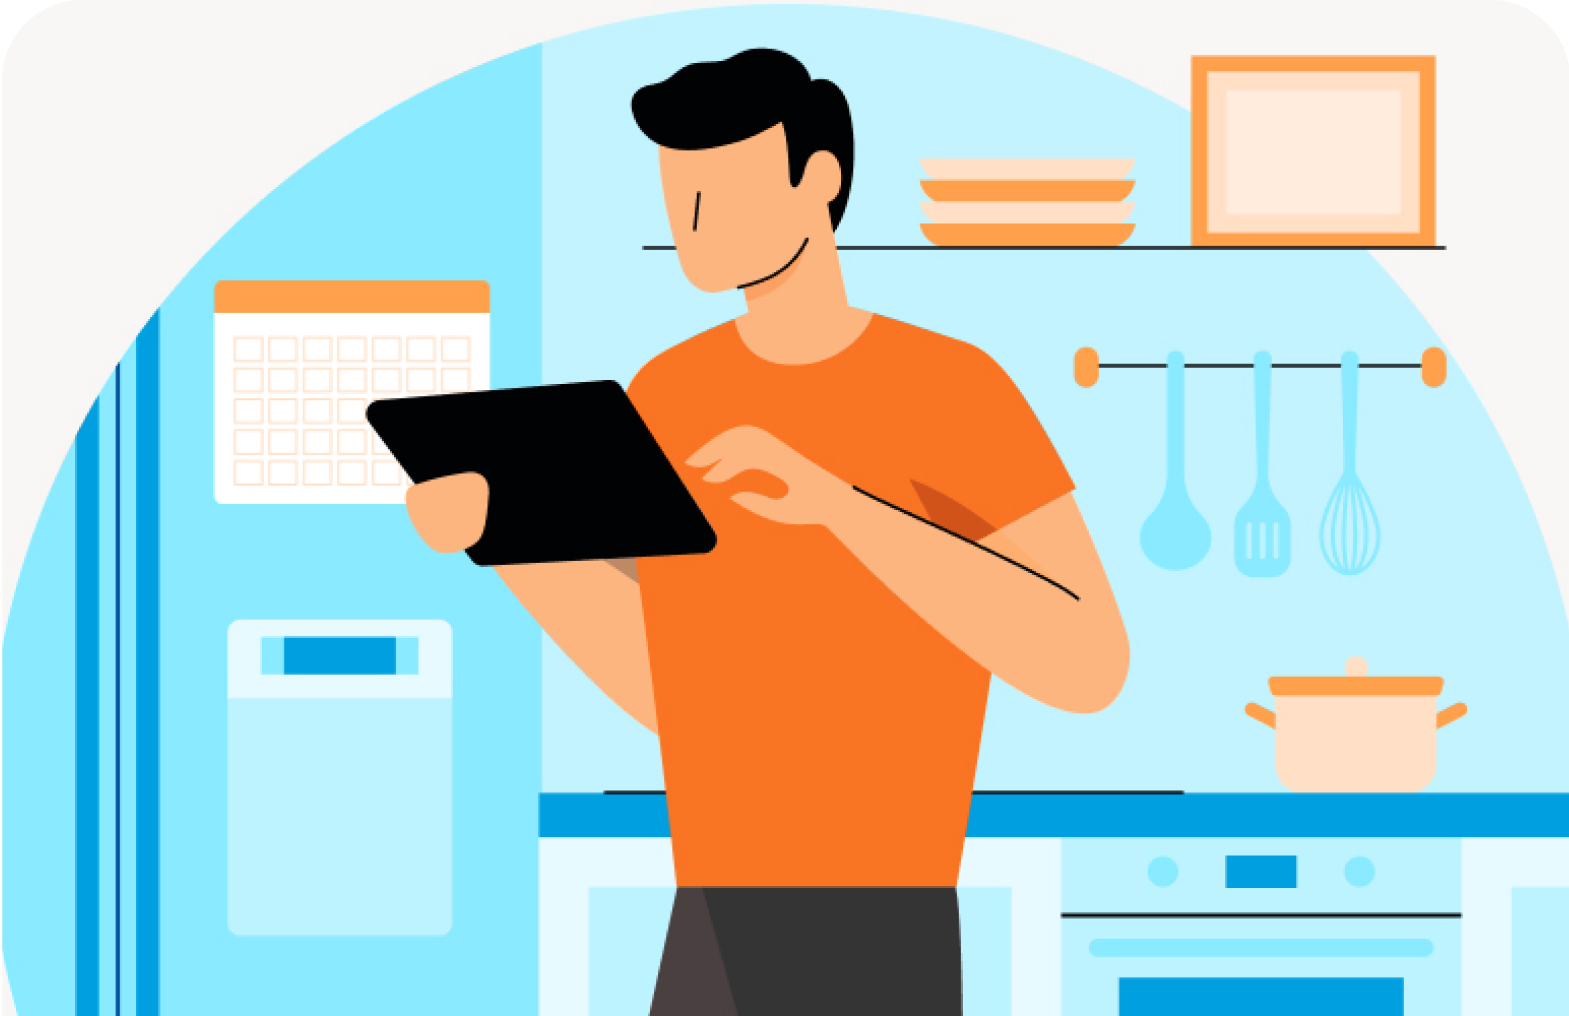 Illustrated image of a man standing in a kitchen using a tablet device